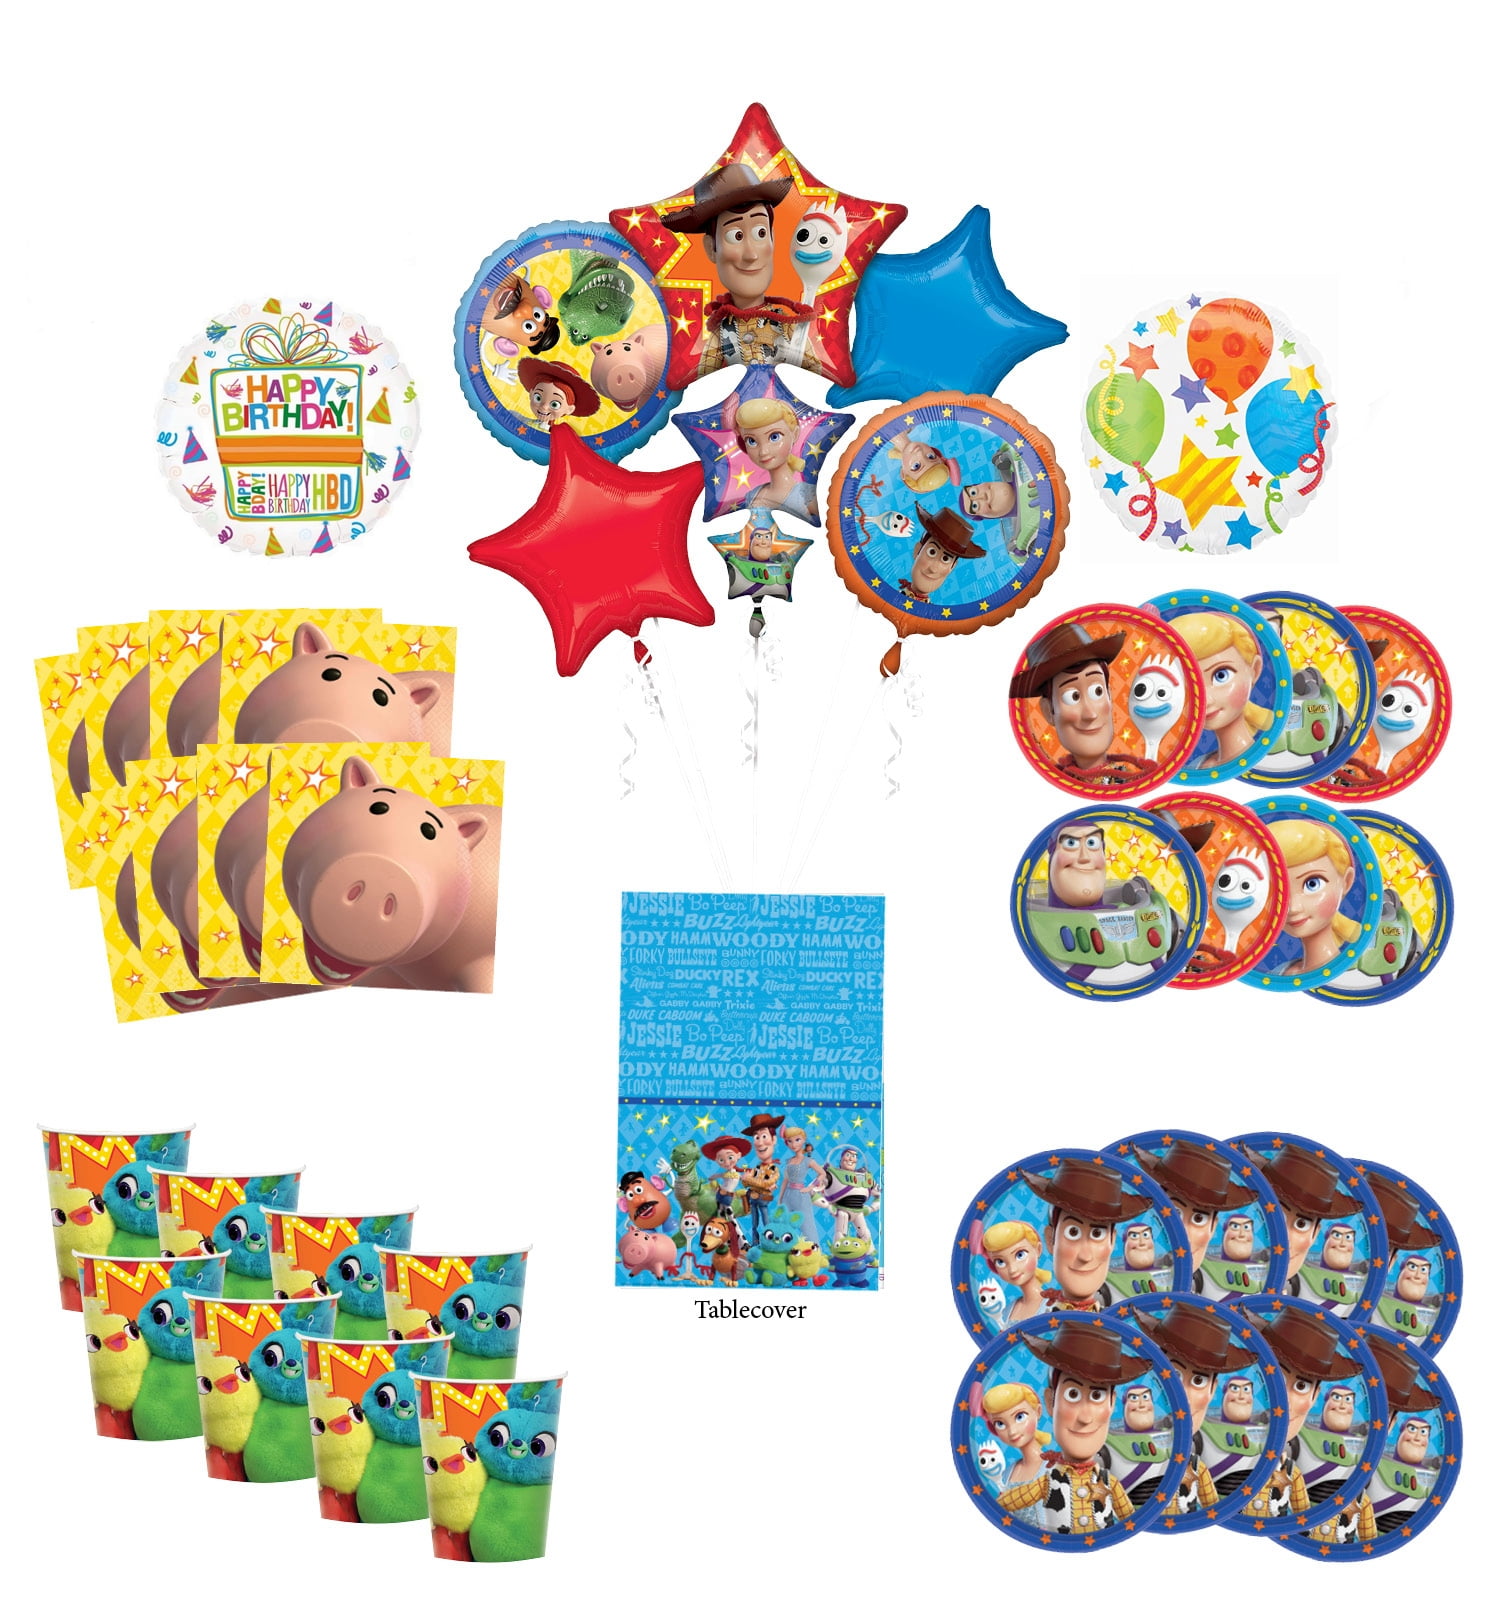 Disney Pixar Toy Story Kids Birthday Party Tableware Decorations Balloons Access 